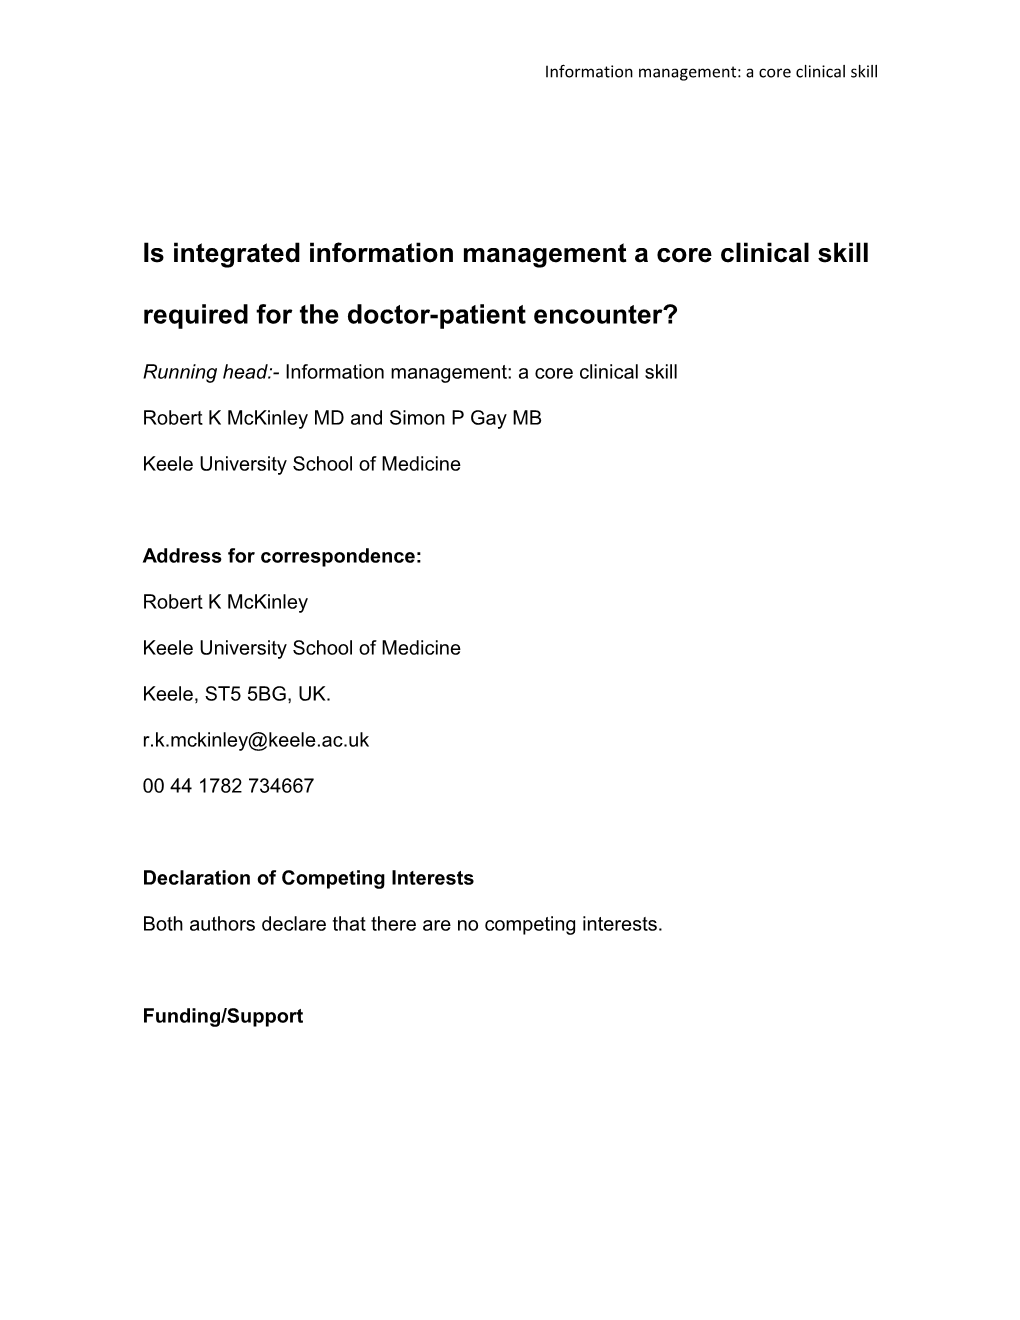 Information Management: a Core Clinical Skill